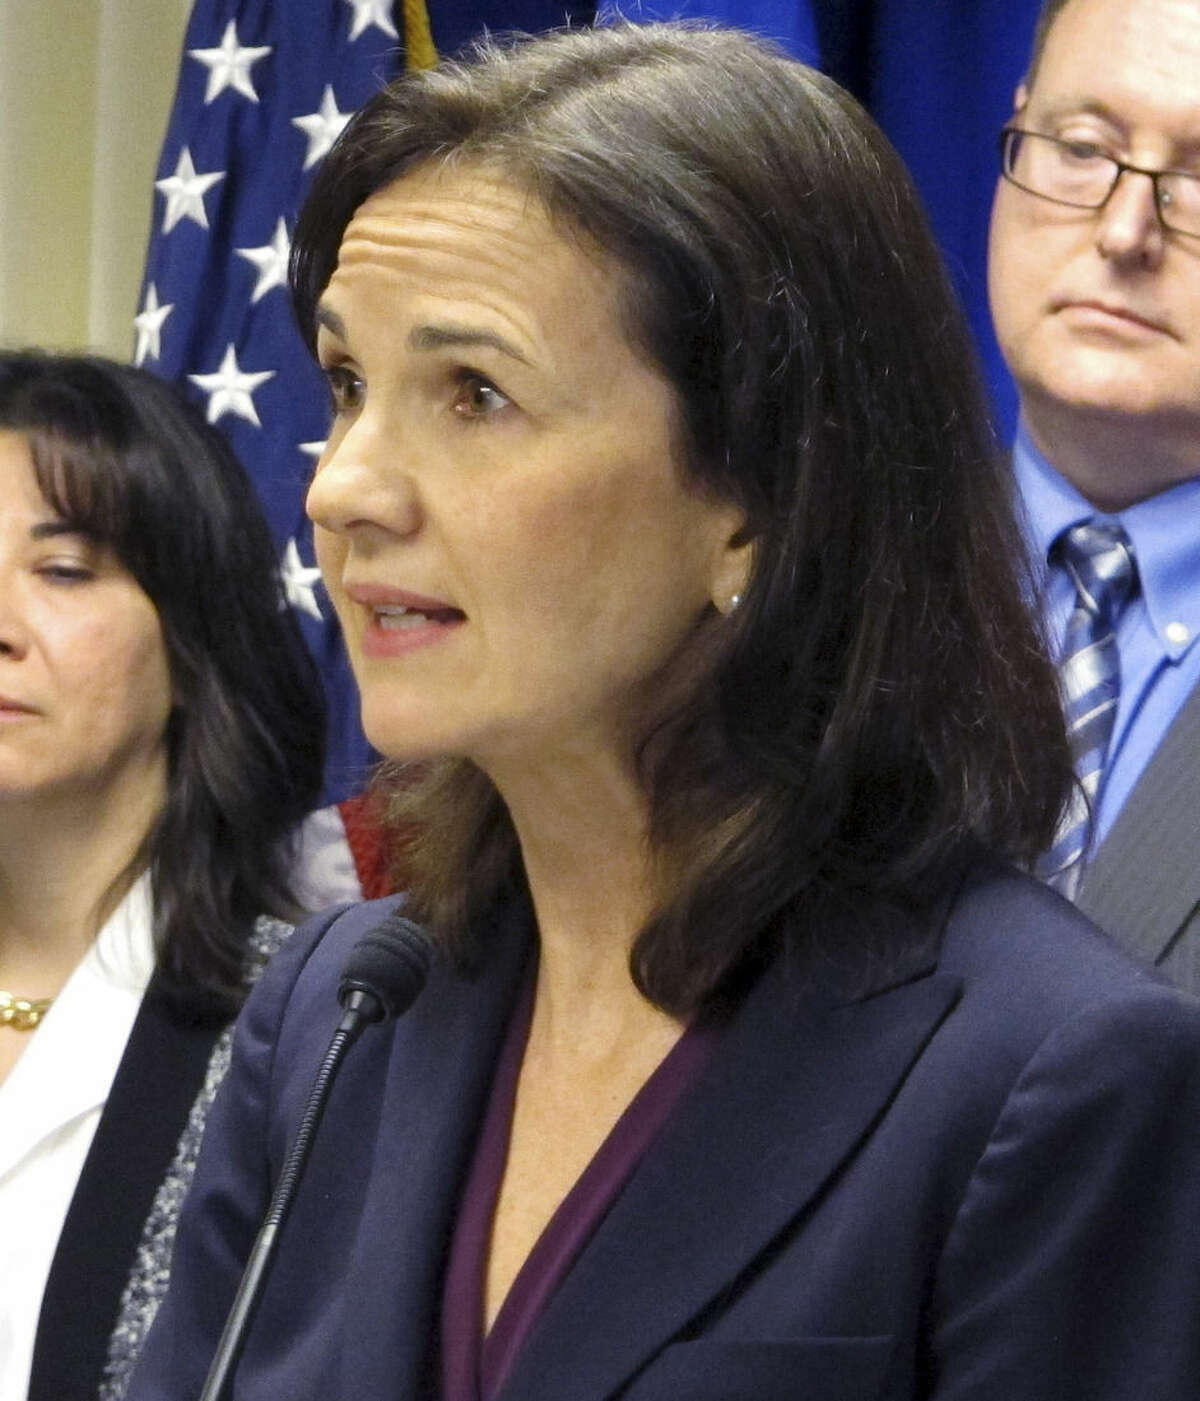 Deirdre Daly, the U.S. attorney for Connecticut, stands with other federal officials while announcing a new public corruption task force on Wednesday, Feb. 4, 2015, in New Haven, Conn. Daly said the problem of corruption in the state is persistent and troubling, given the large number of high-profile prosecutions over the past several years. (AP Photo/Dave Collins)